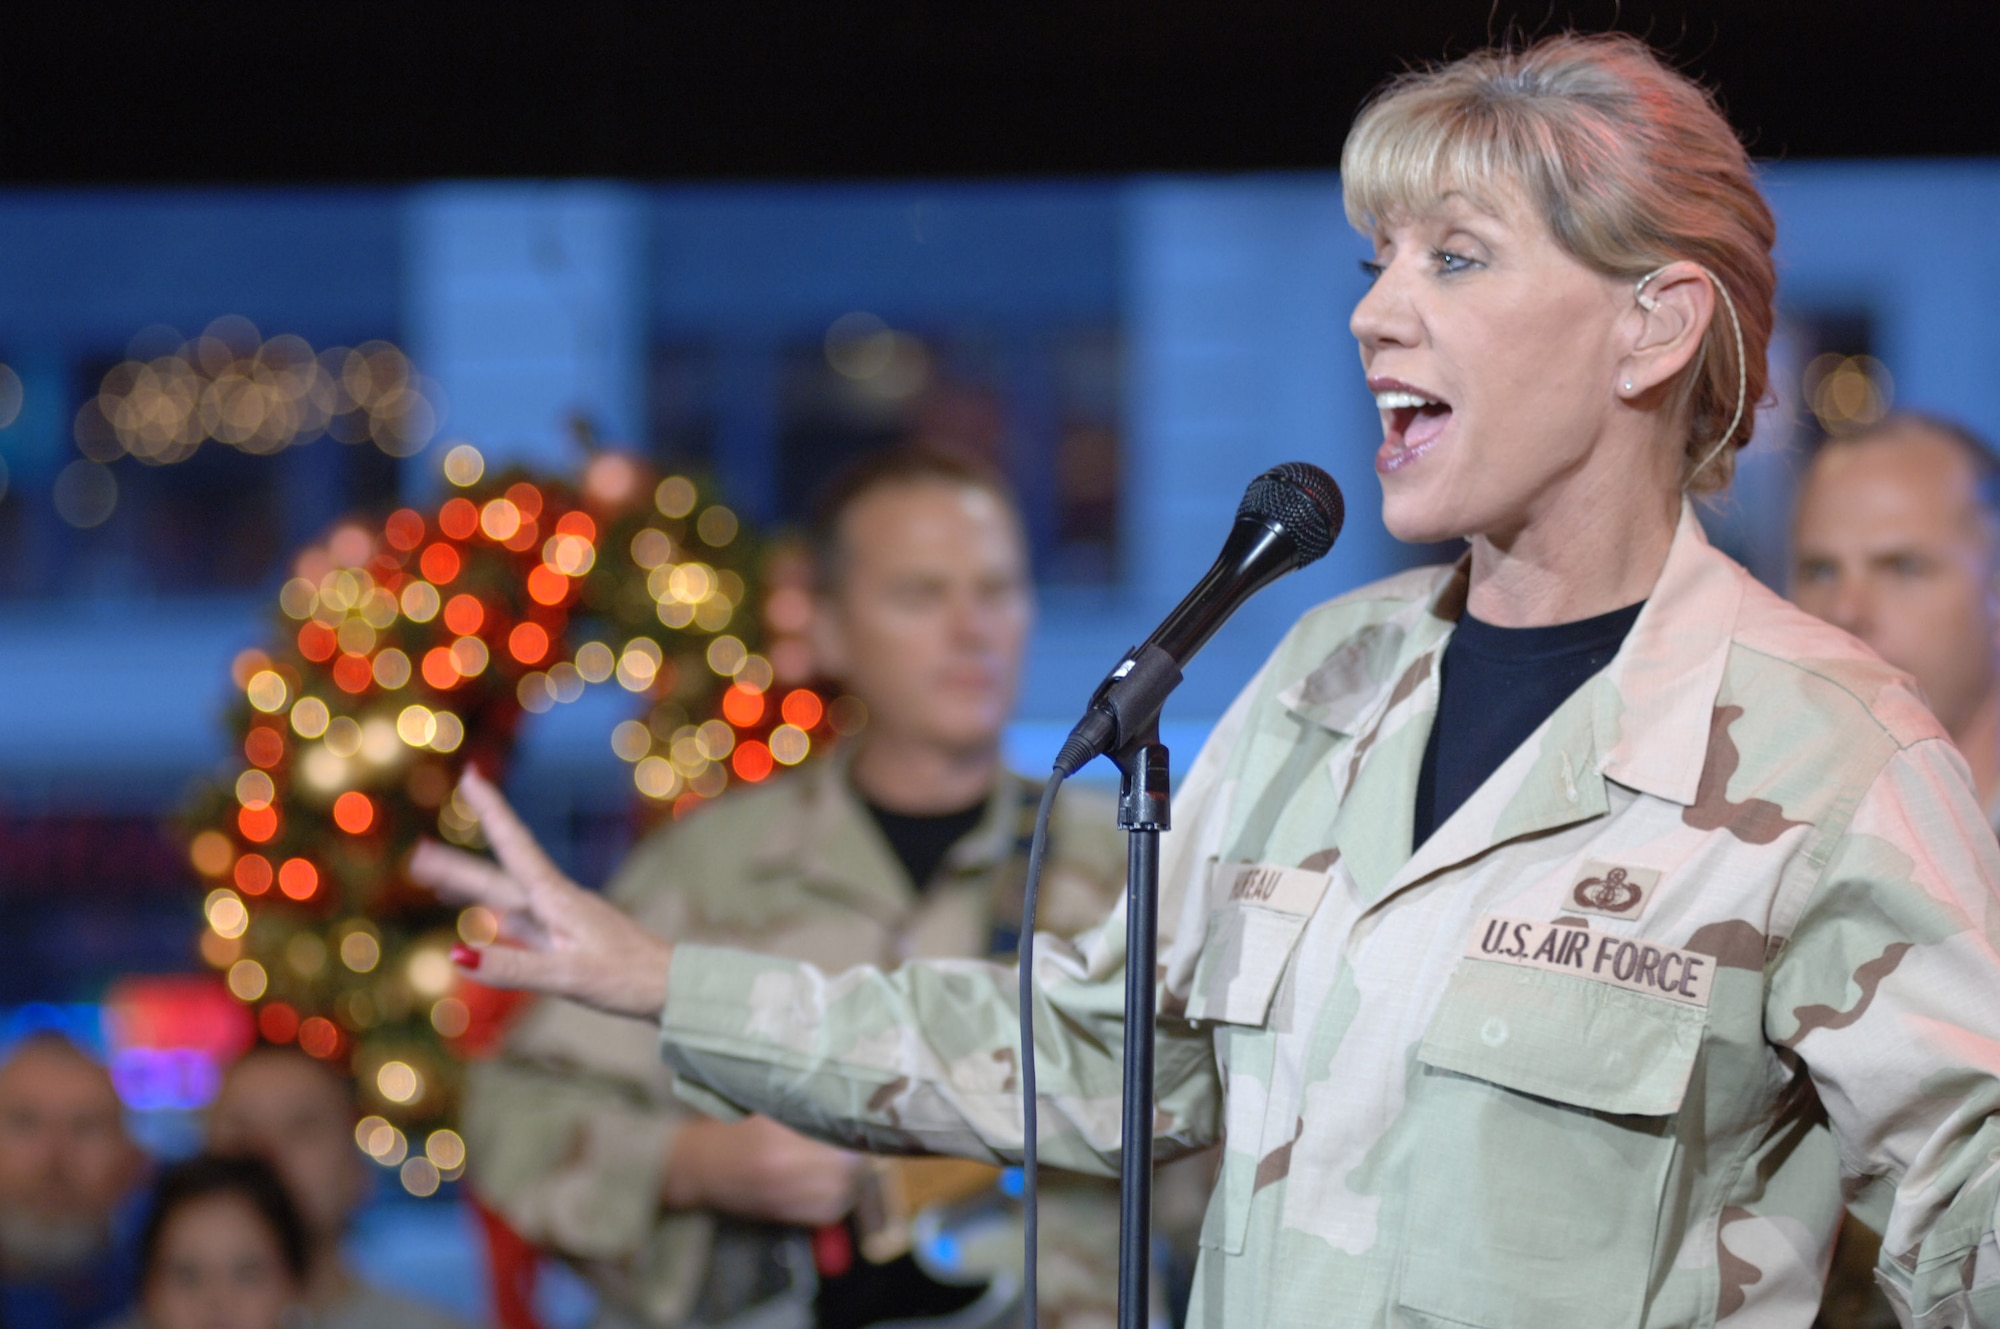 Chief Master Sgt. Marcie Hureau sings with Wild Blue Country on Good Morning America Nov. 24 in New York City. The performance was part of a five-day tour by the U.S. Air Force Academy Band, accompanied by the cadet chorale and falconers, in which it had five national television appearances. (U.S. Air Force photo/1st Lt. John Ross) 